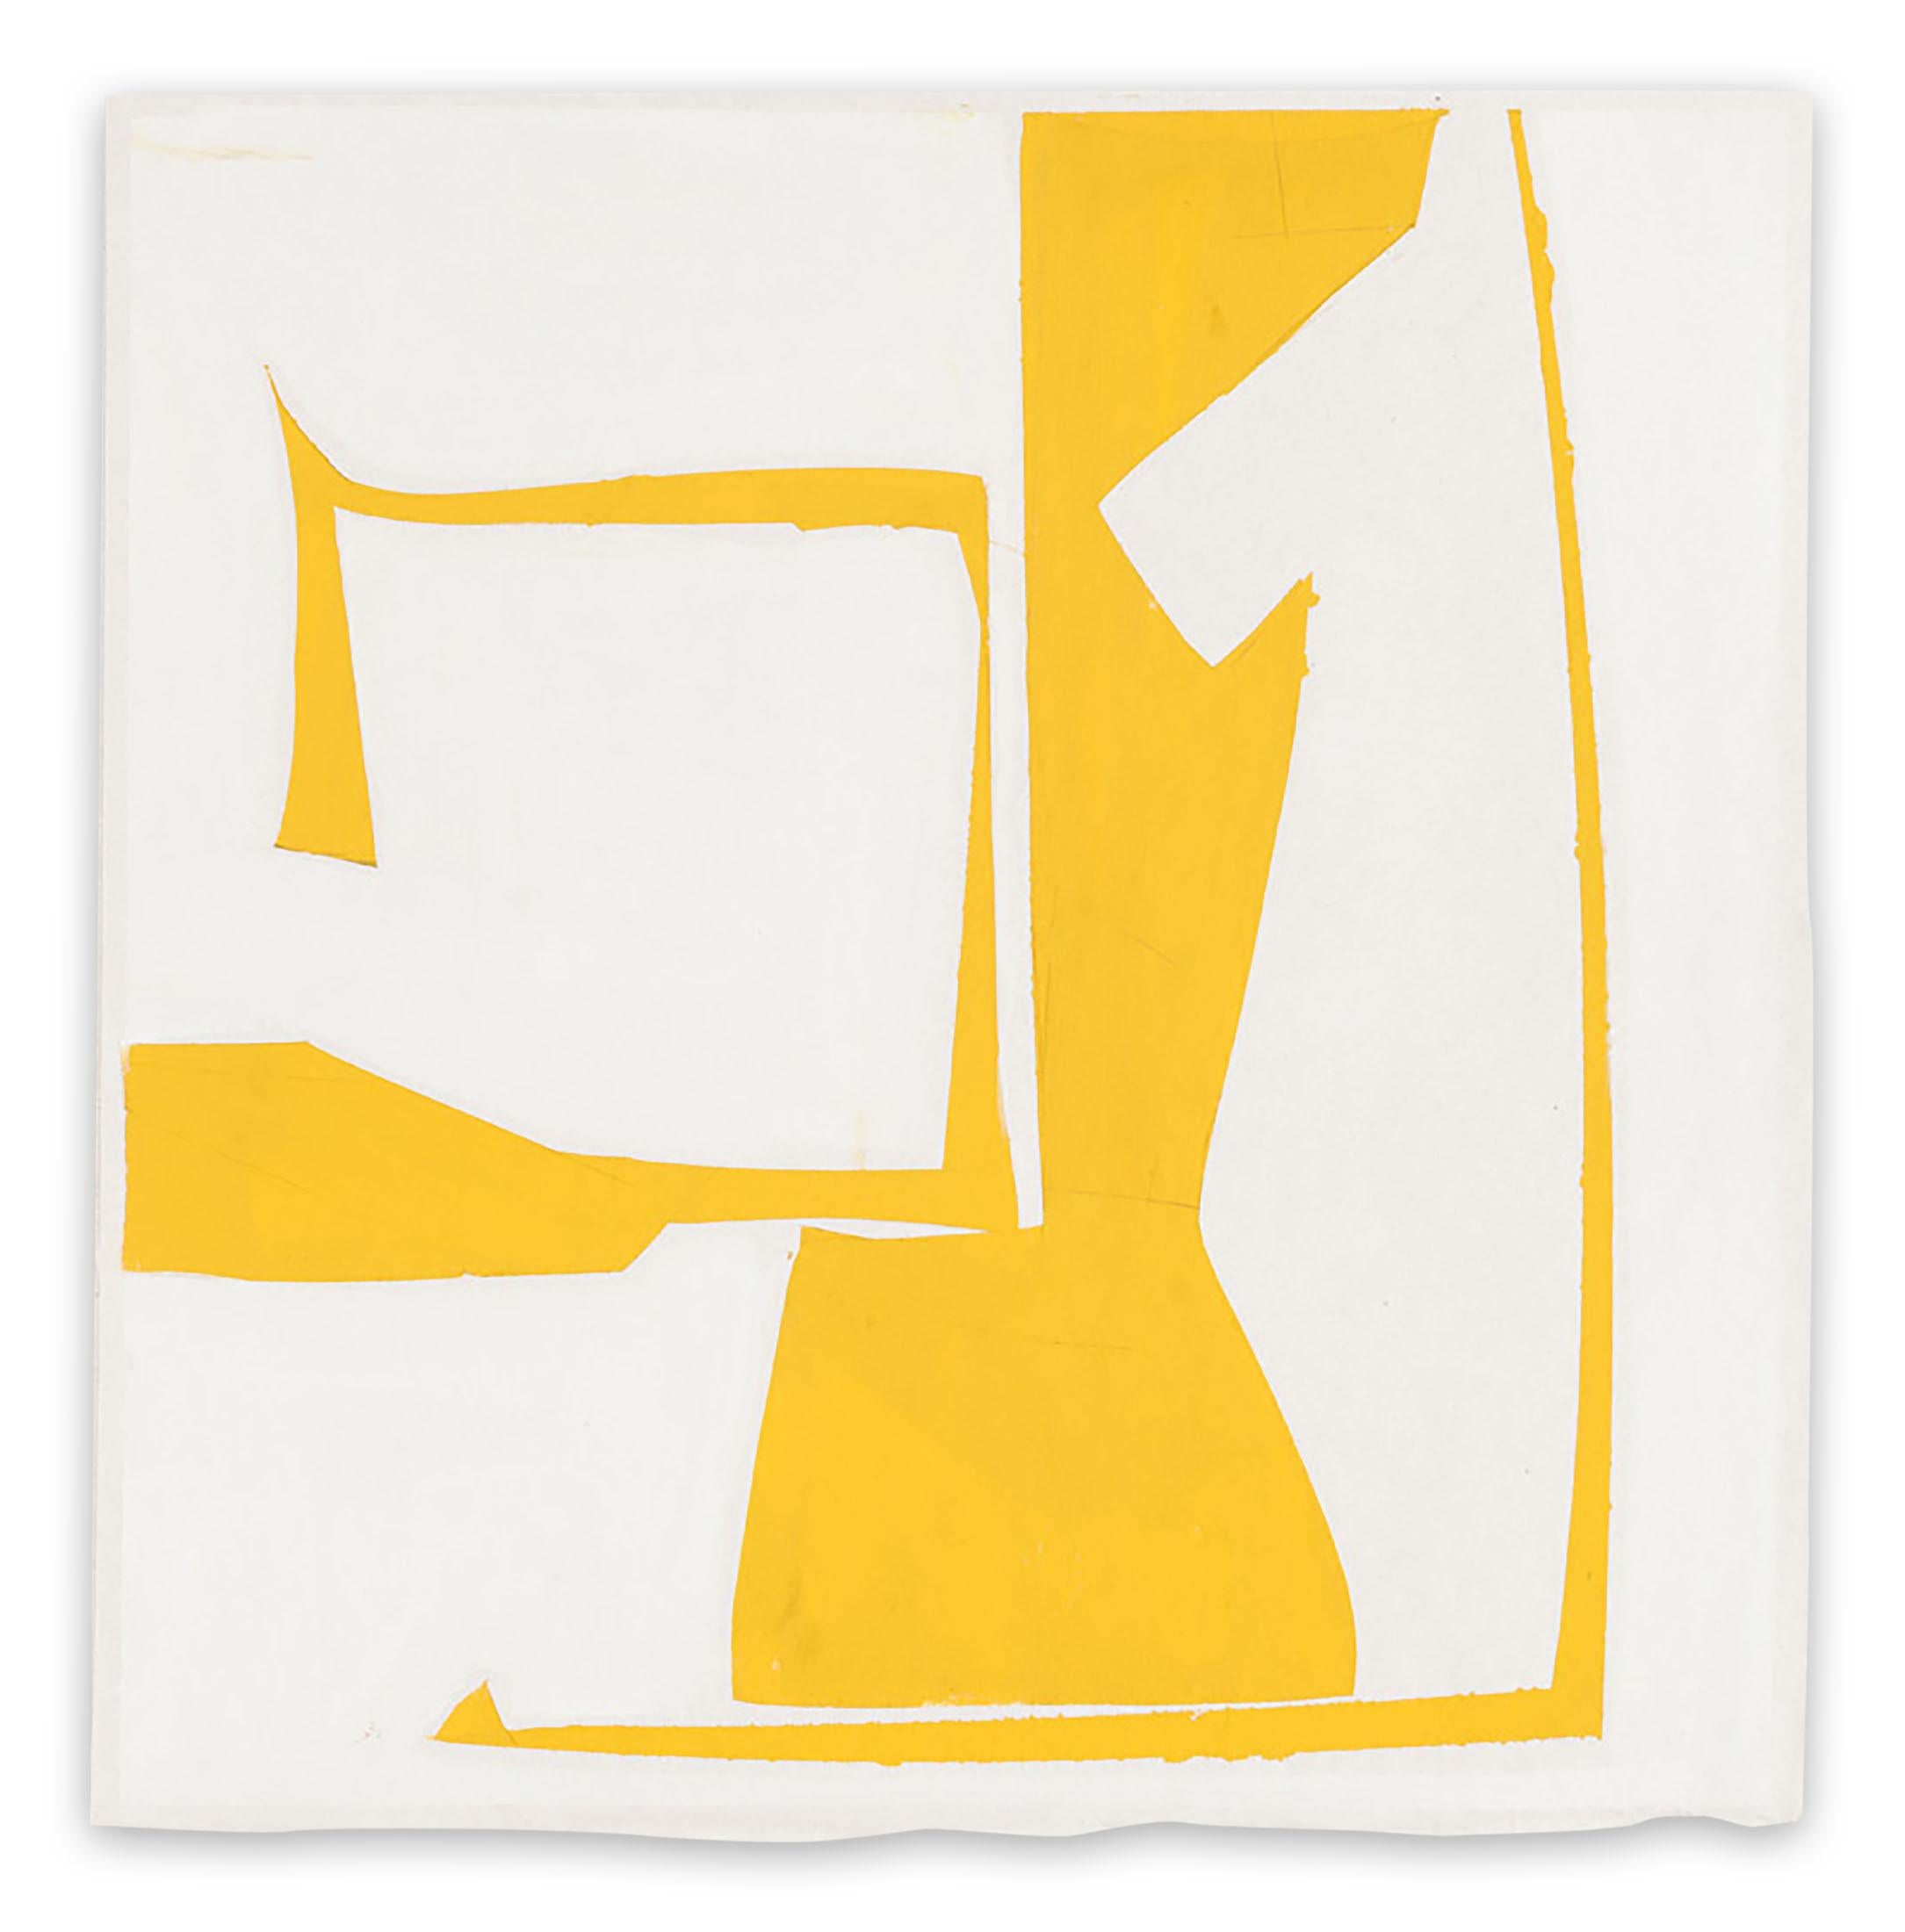 Covers 13 Yellow (Abstract Painting)

Gouache on handmade Khadi paper. Unframed.

Joanne Freeman's works on paper are made with gouache on handmade Indian Khadi paper. 
She uses tape to mask out shapes and employ hard edges, working spontaneously,